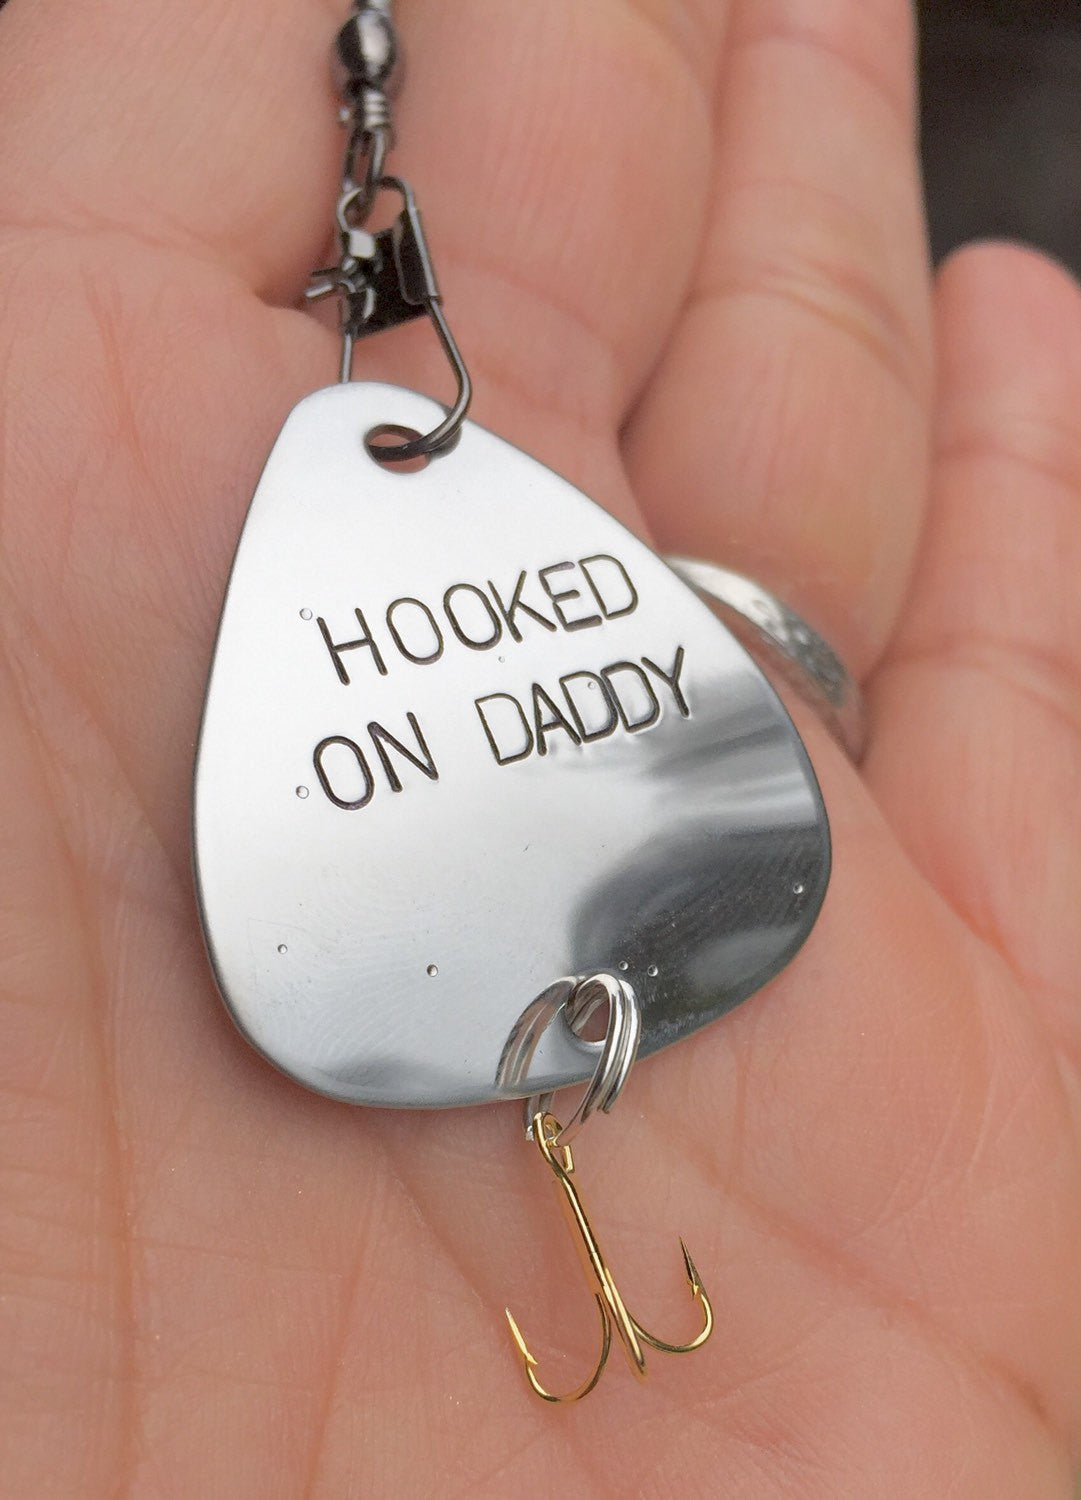 Personalized Fishing Lure, Hooked On Daddy Fishing Lure - Natashaaloha, jewelry, bracelets, necklace, keychains, fishing lures, gifts for men, charms, personalized, 